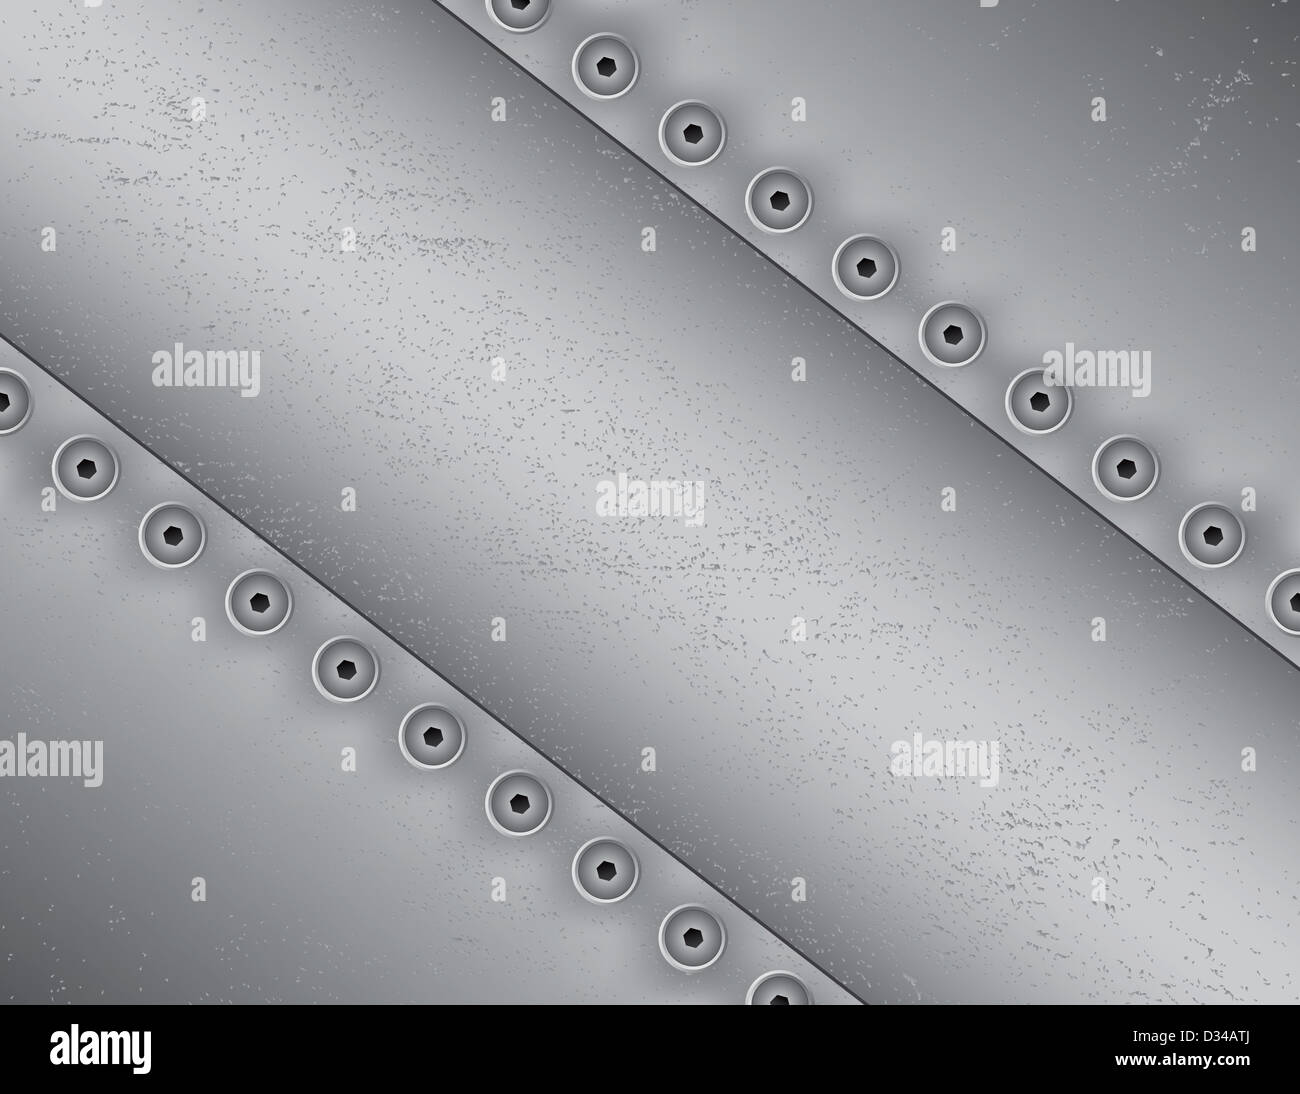 Metal Riveted Background Stock Photo